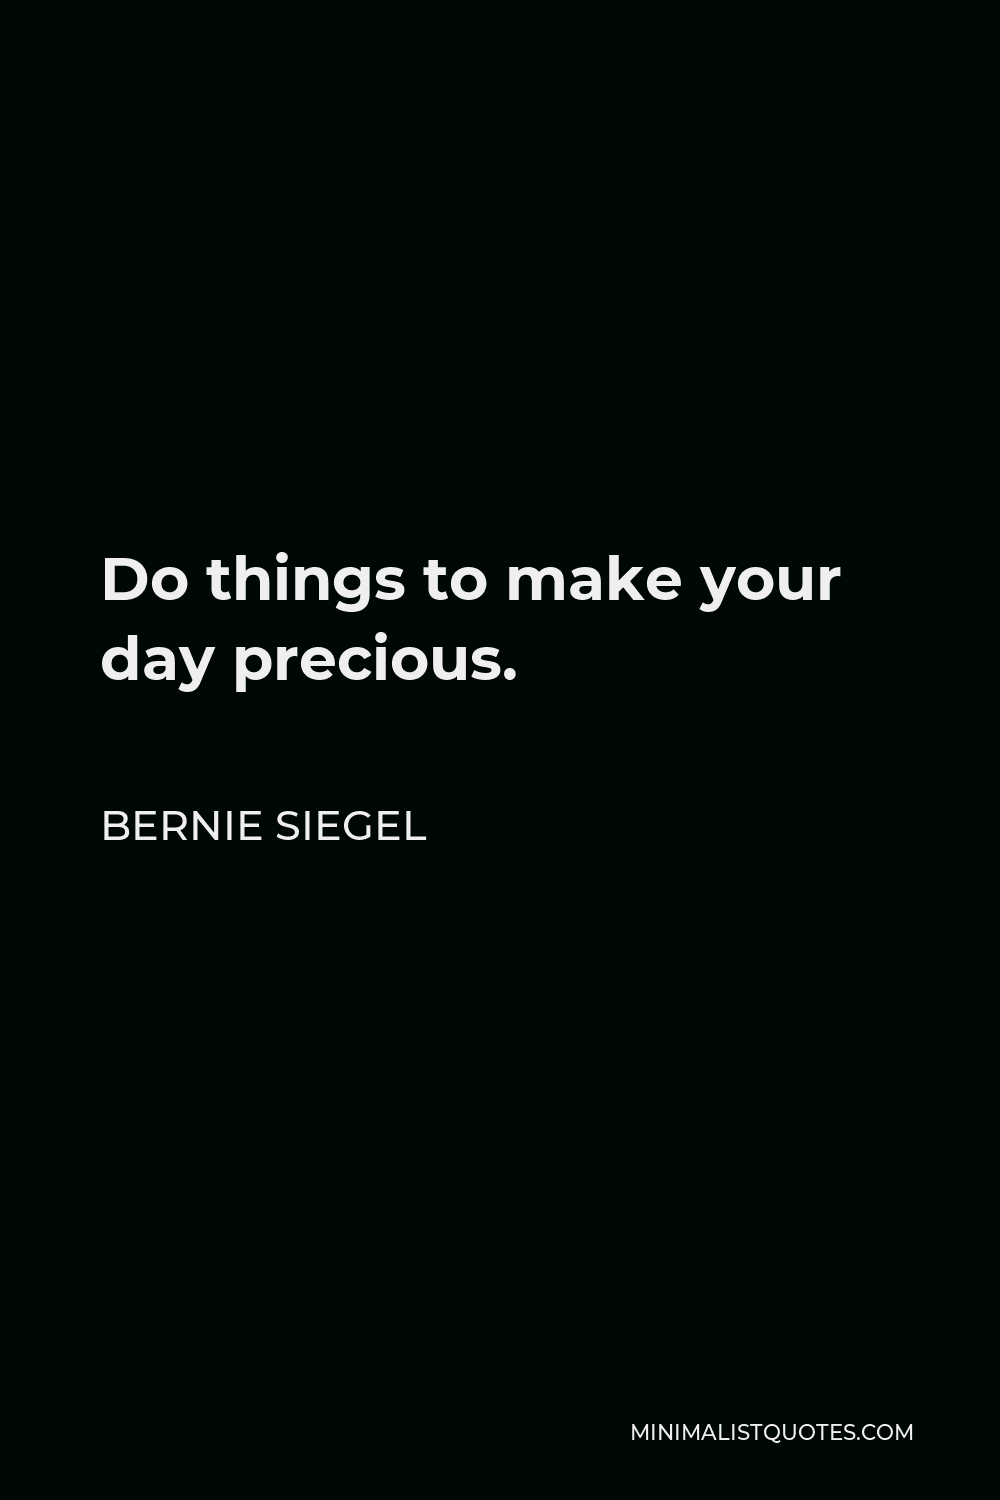 Bernie Siegel Quote - Do things to make your day precious.